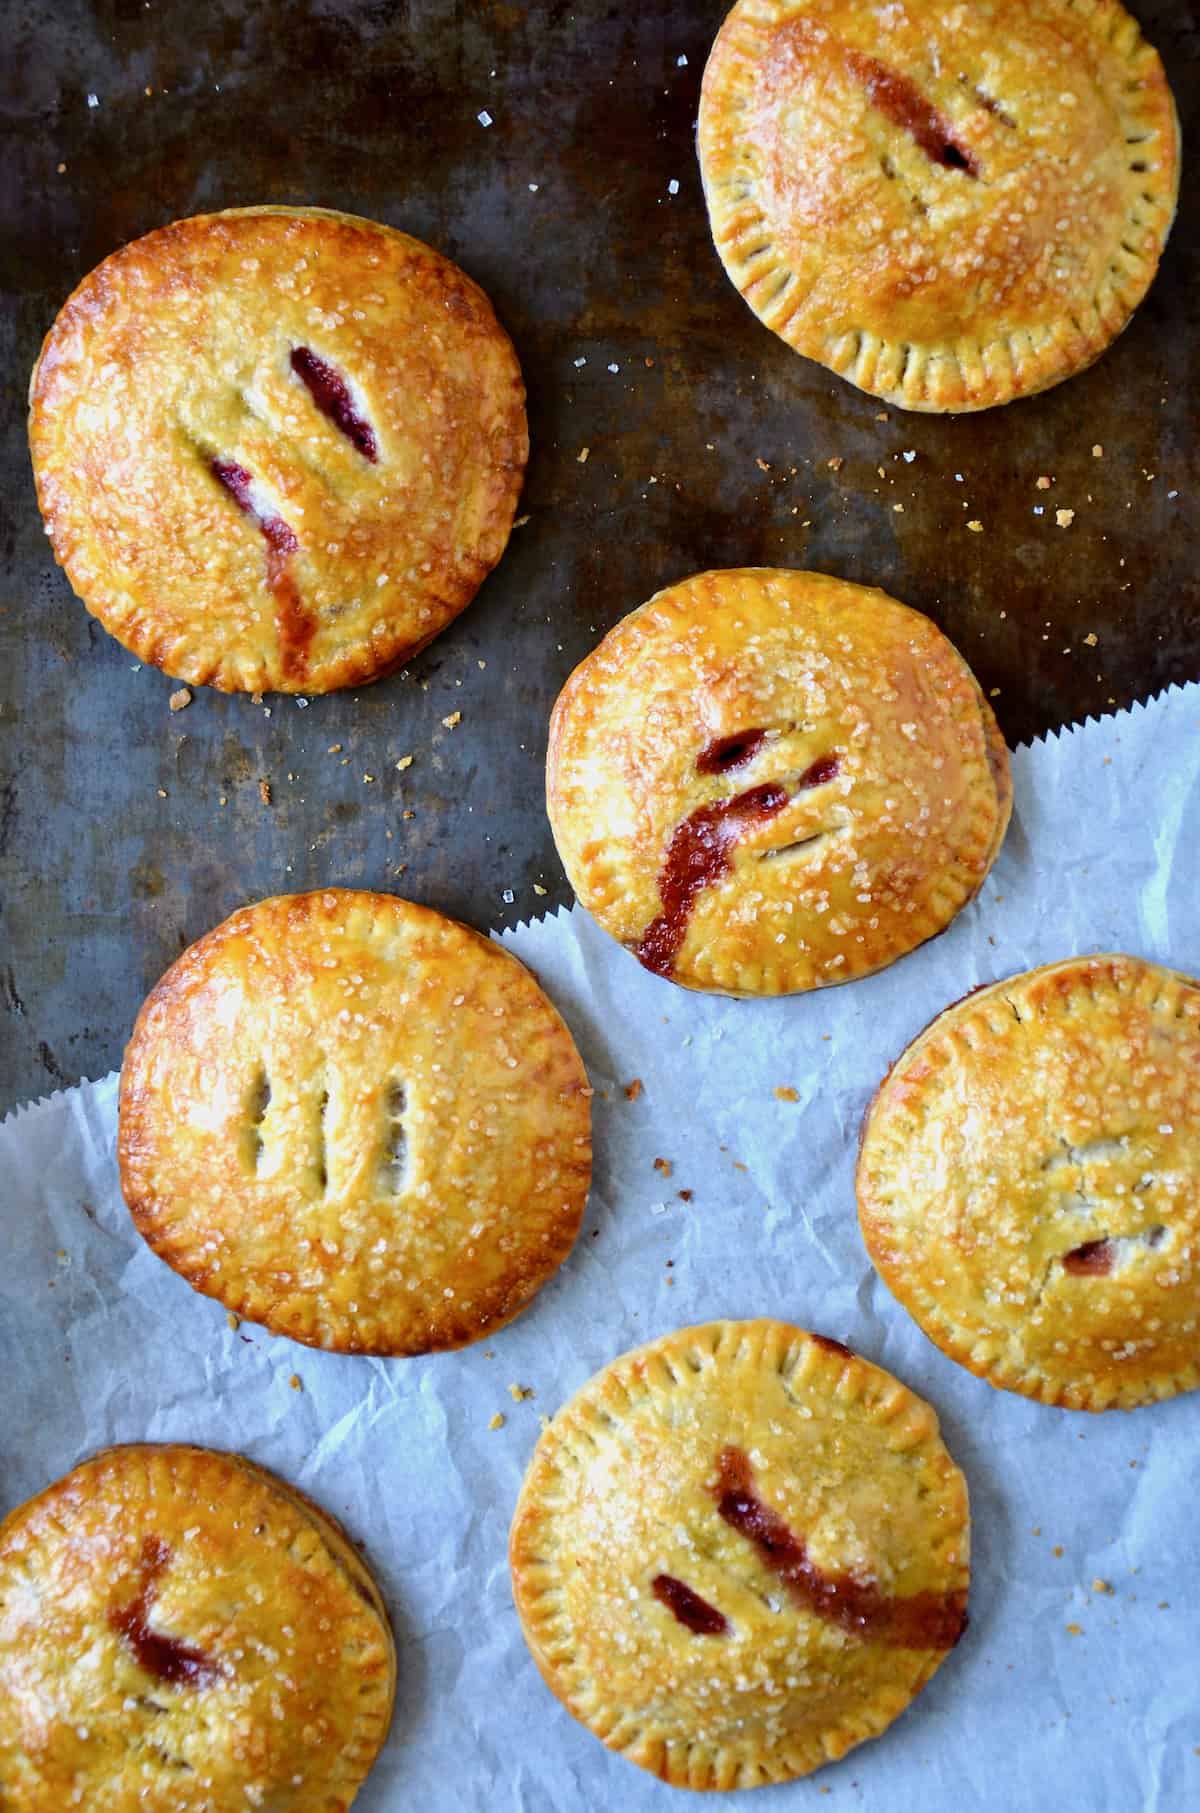 Hand pies filled with strawberry and nutella are arranged on a piece of parchment paper.